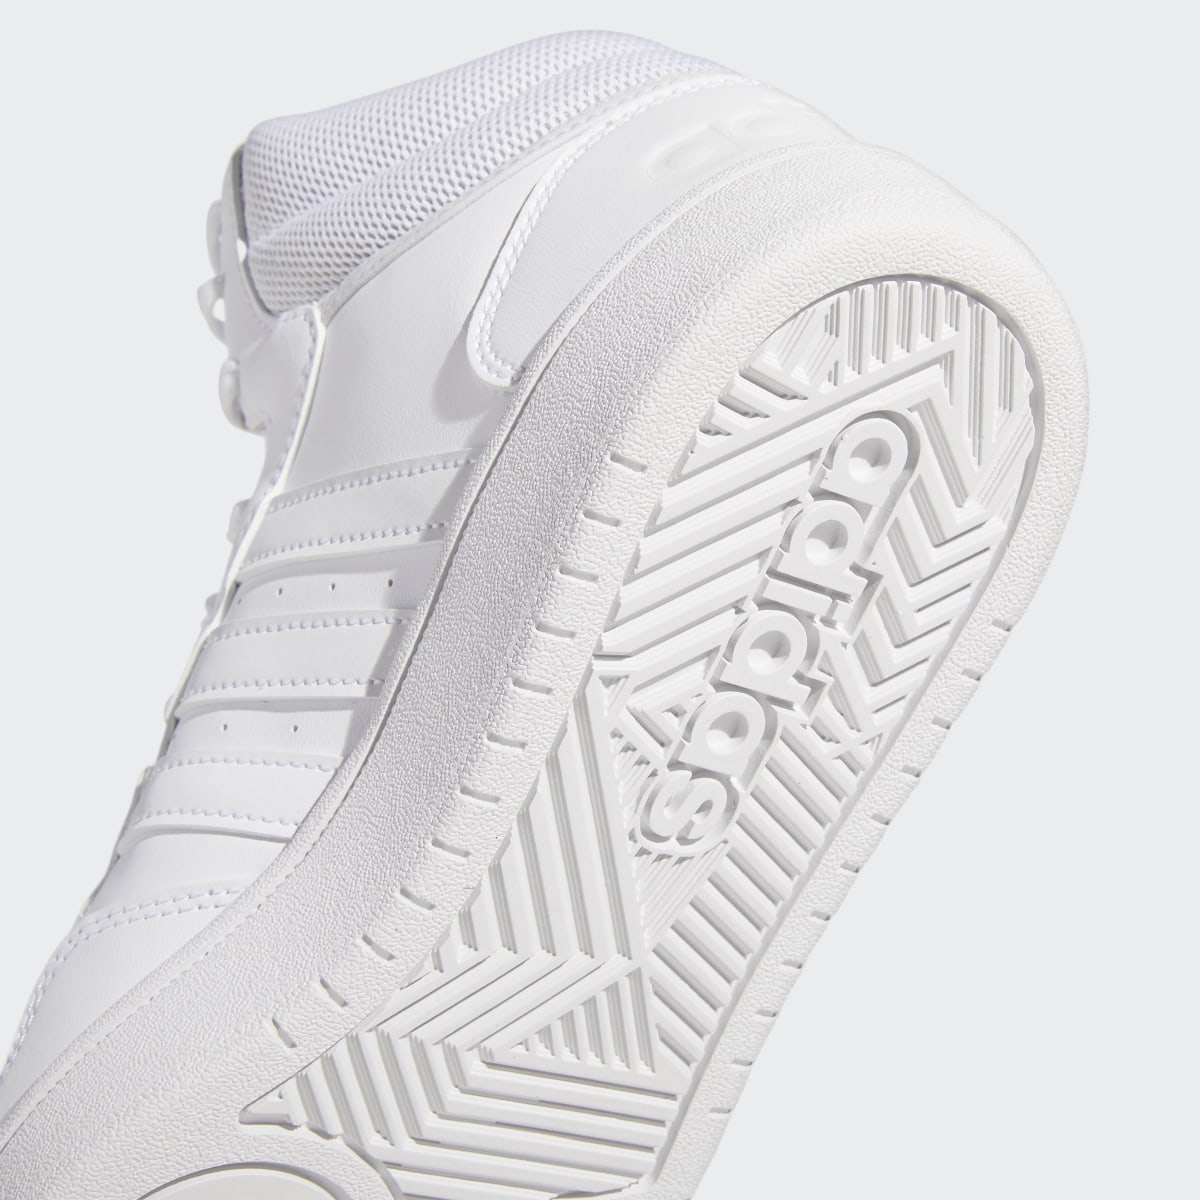 Adidas Hoops 3.0 Mid Classic Shoes. 10